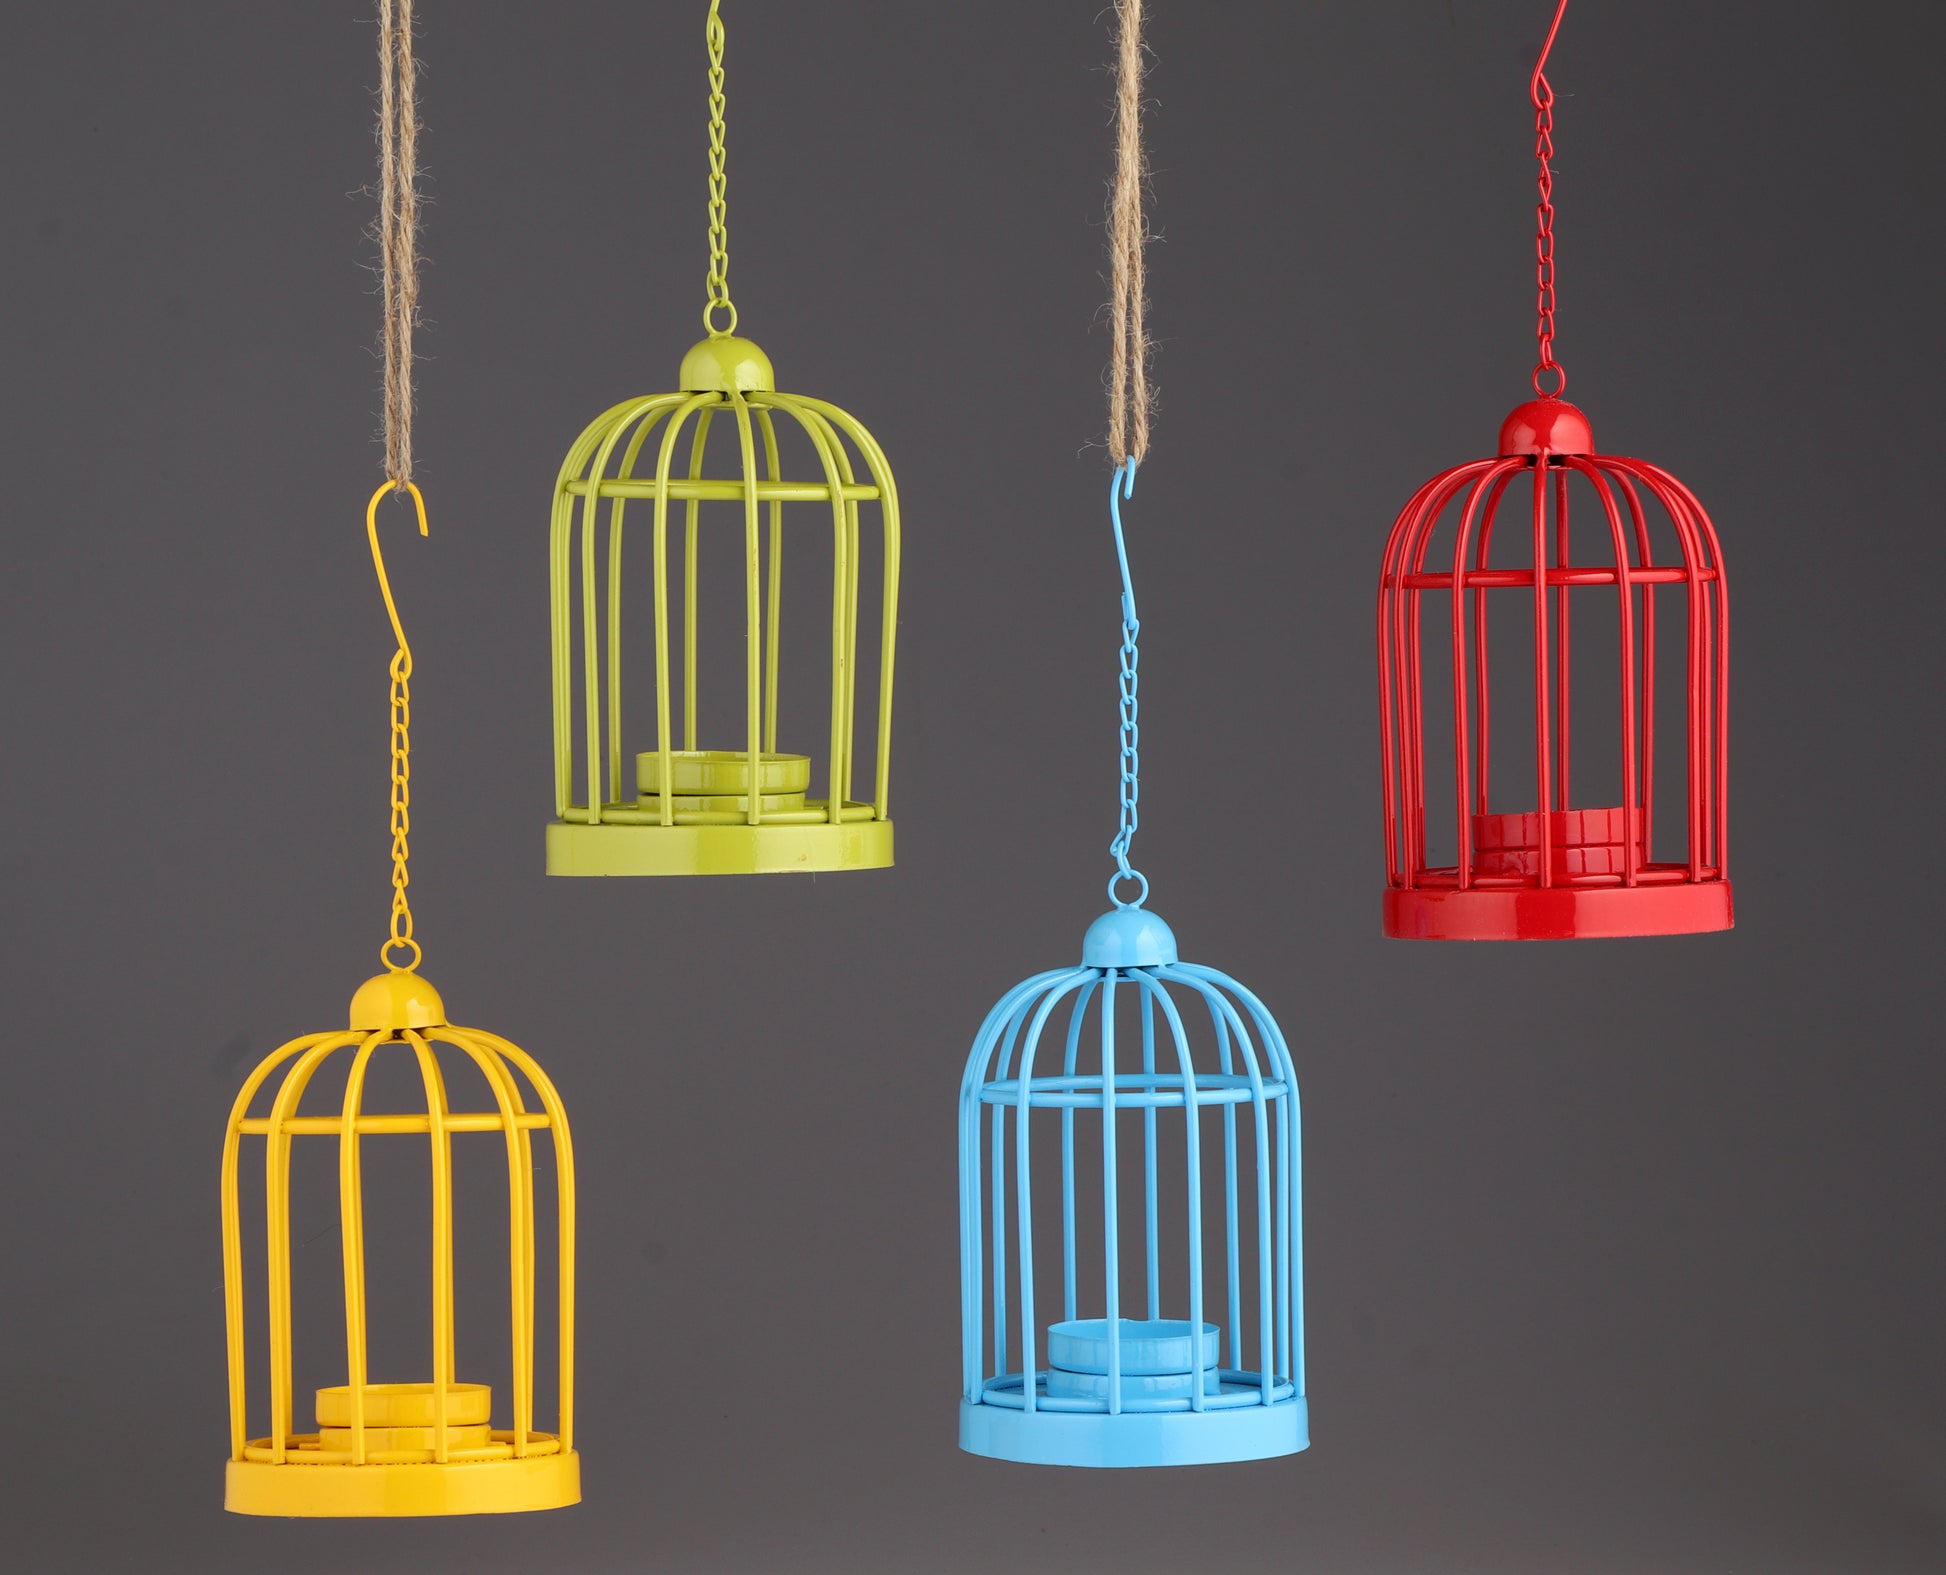 Metal Bird Cage Candle Holder  Multi-colored Hanging Bird Cage - Blue –  Plutus Imports